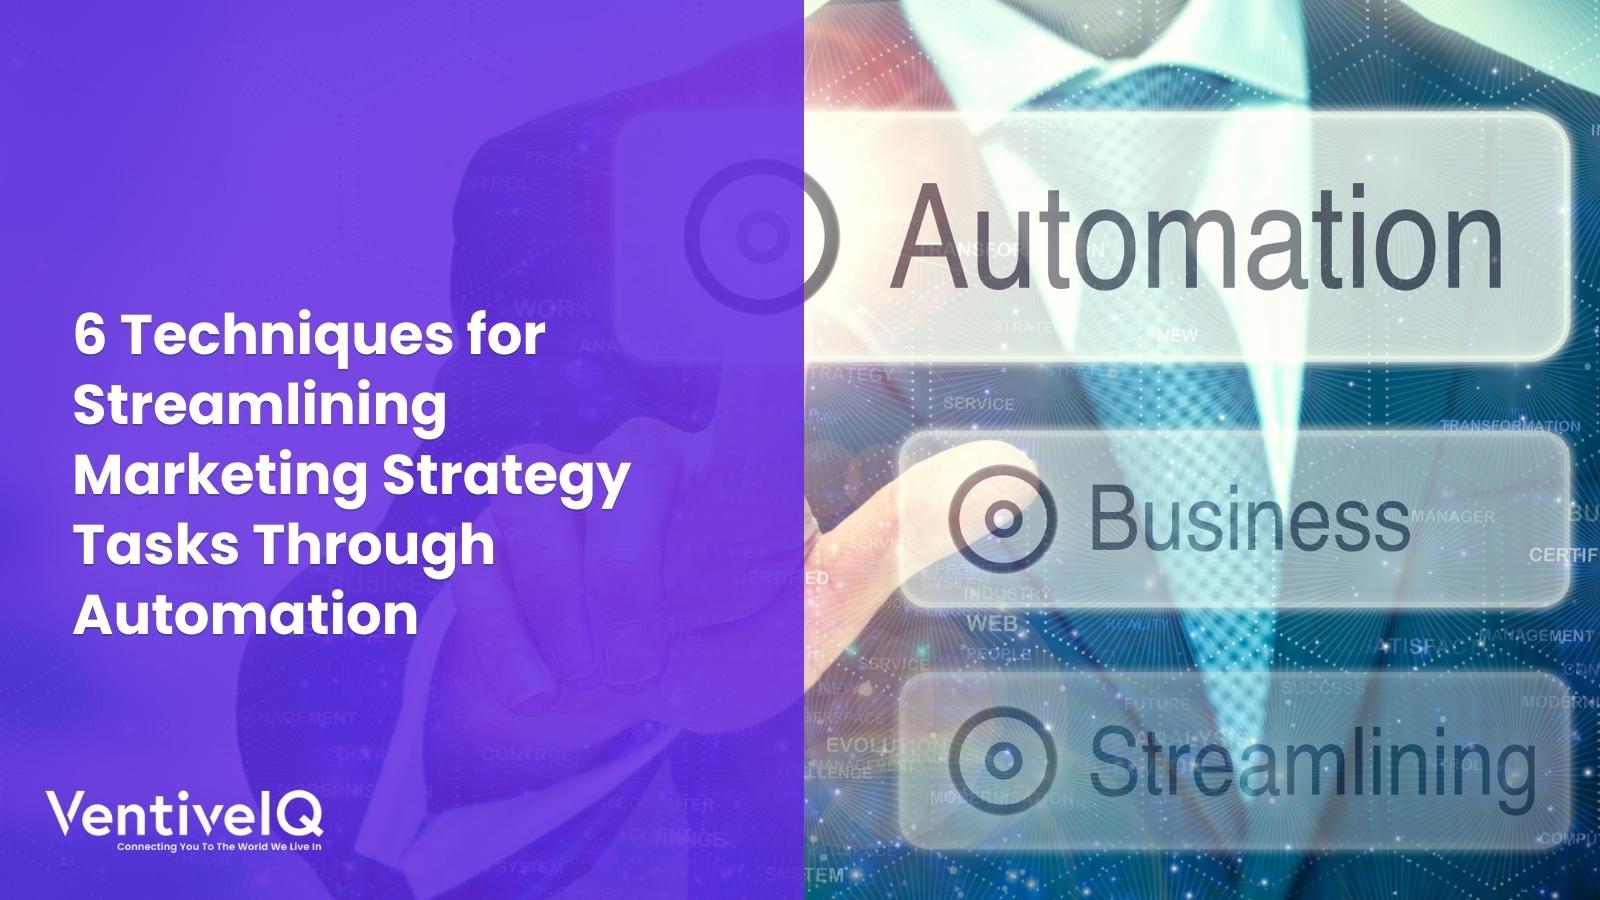 6 Techniques for Streamlining Marketing Strategy Tasks Through Automation